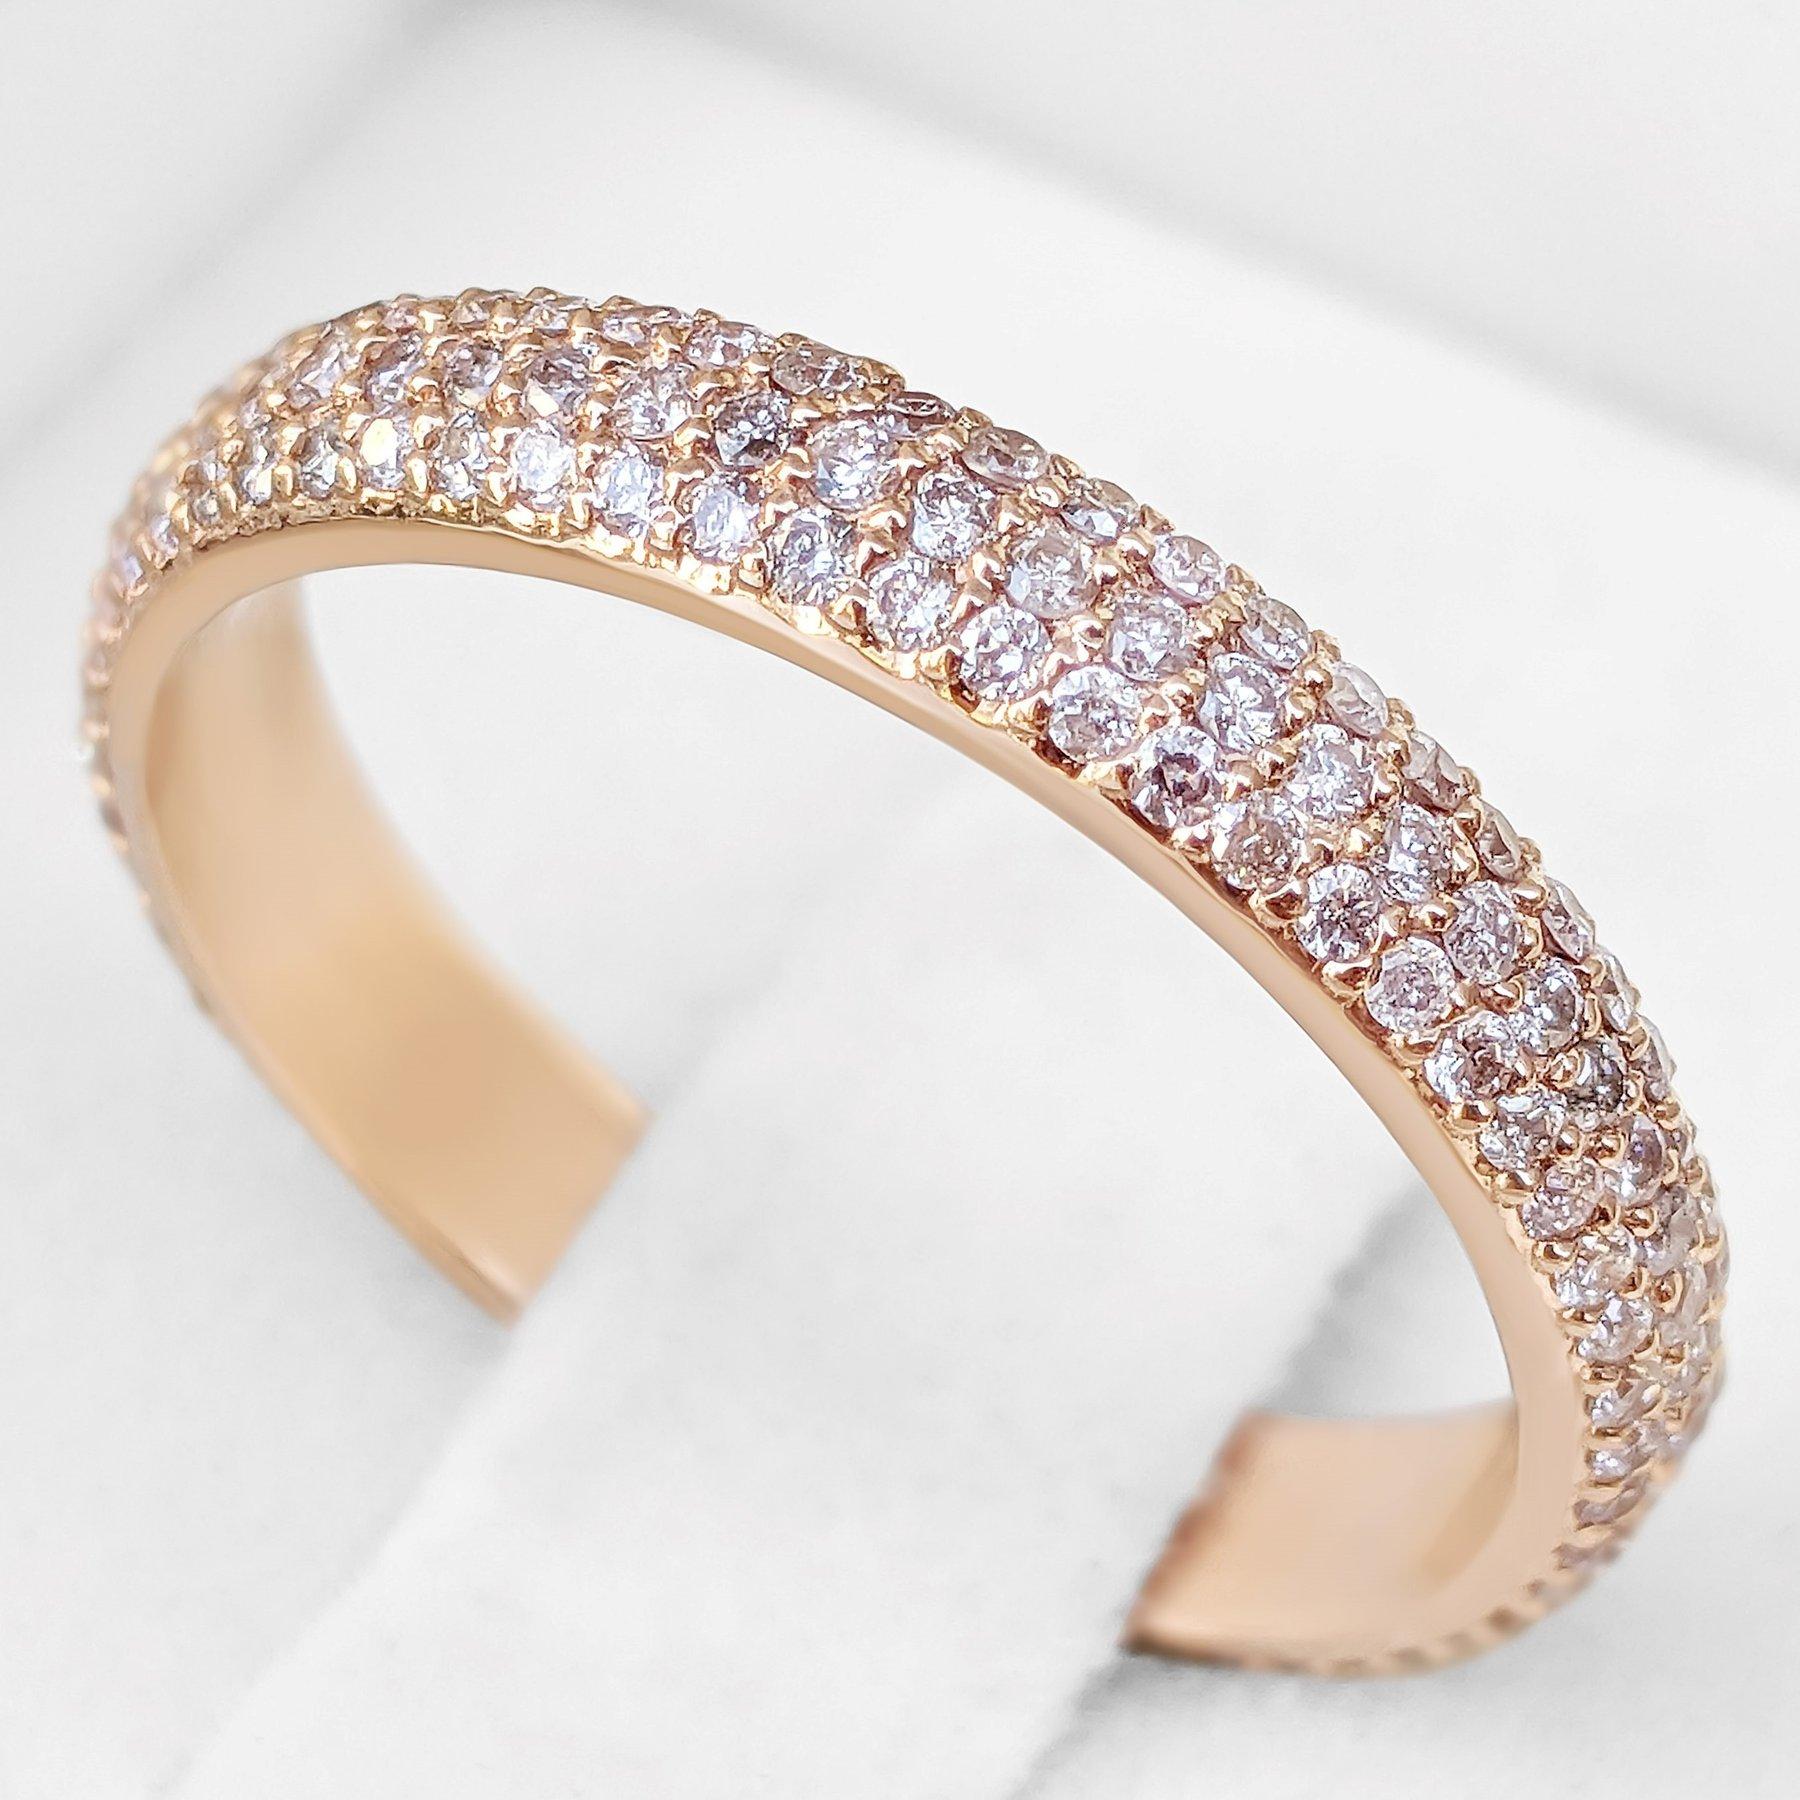 Women's NO RESERVE! 1.01Ct Fancy Diamonds Eternity Band - 14 kt. Rose gold - Ring For Sale